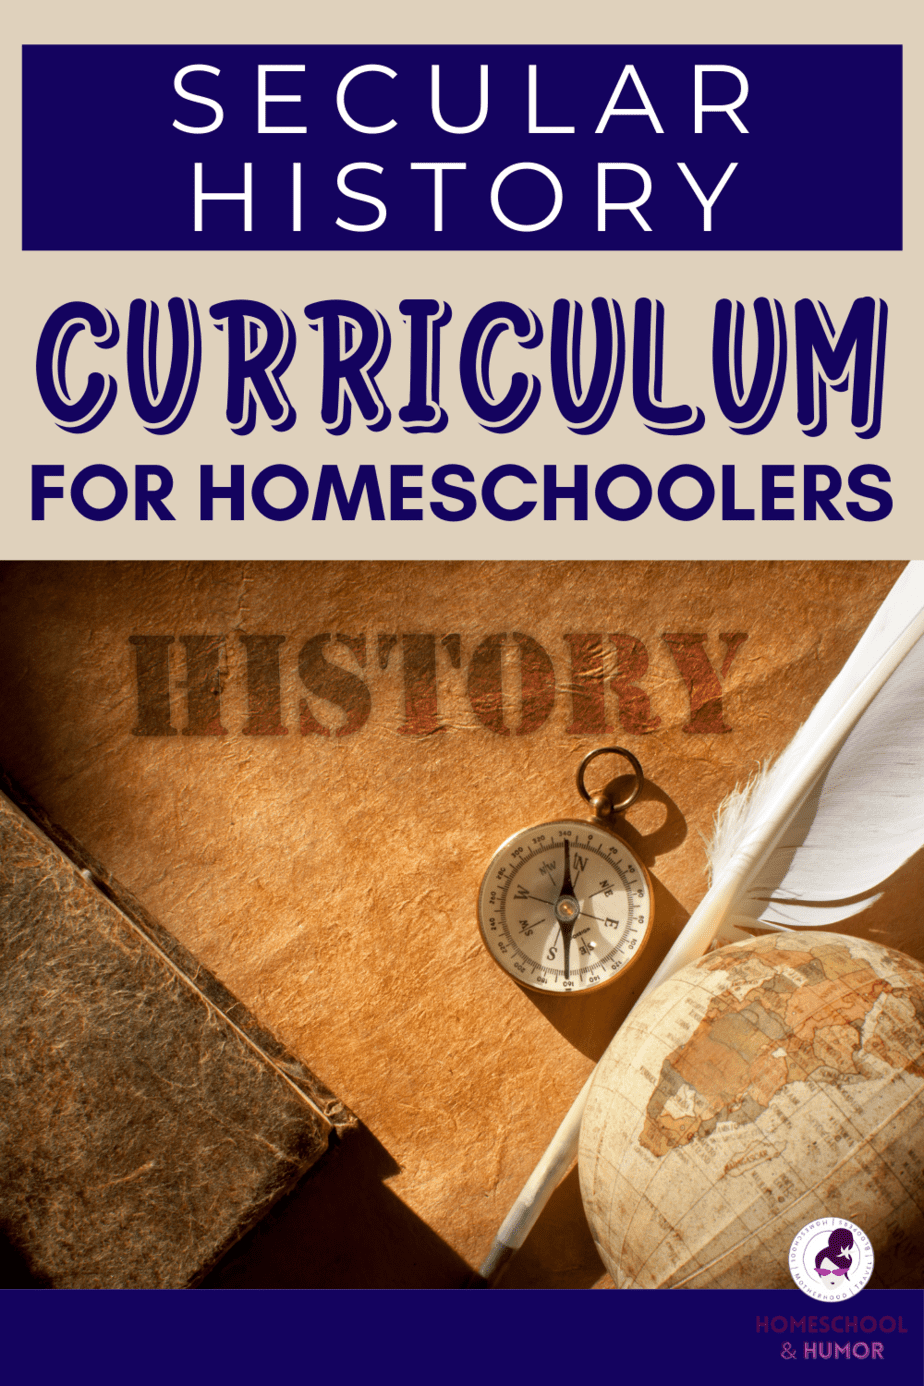 Best Secular Homeschool History Curriculum Options for Middle Schoolers